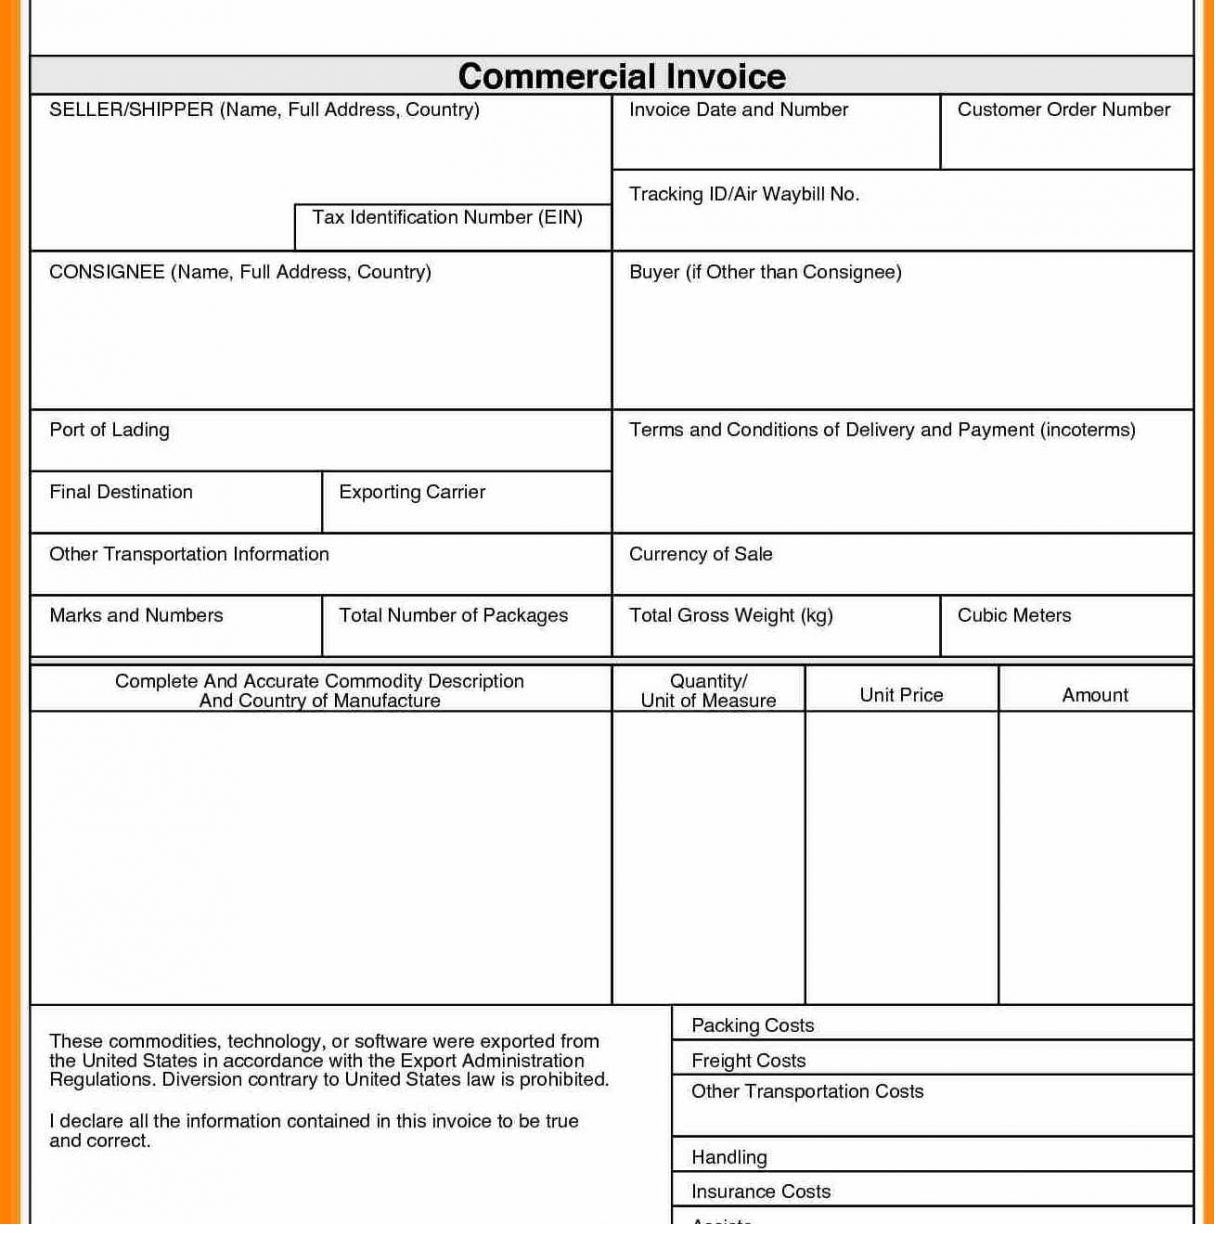 commercial invoice definition description features the meaning of commercial invoice